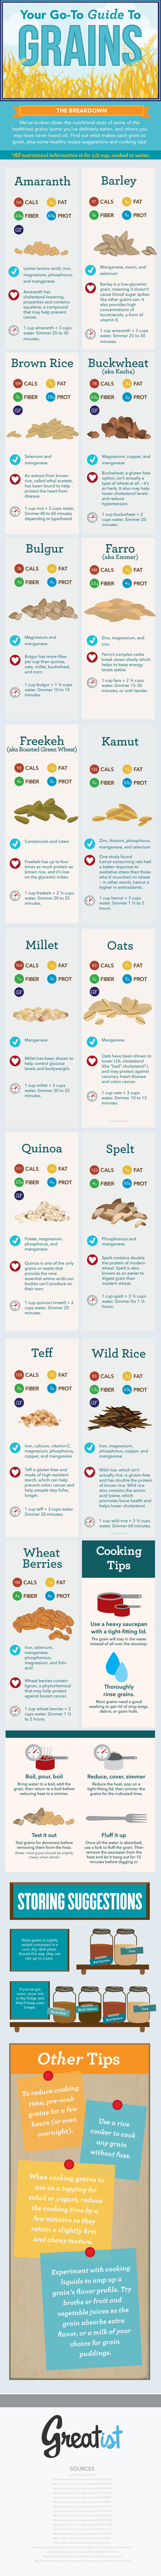 15 Healthy Grains Infographic